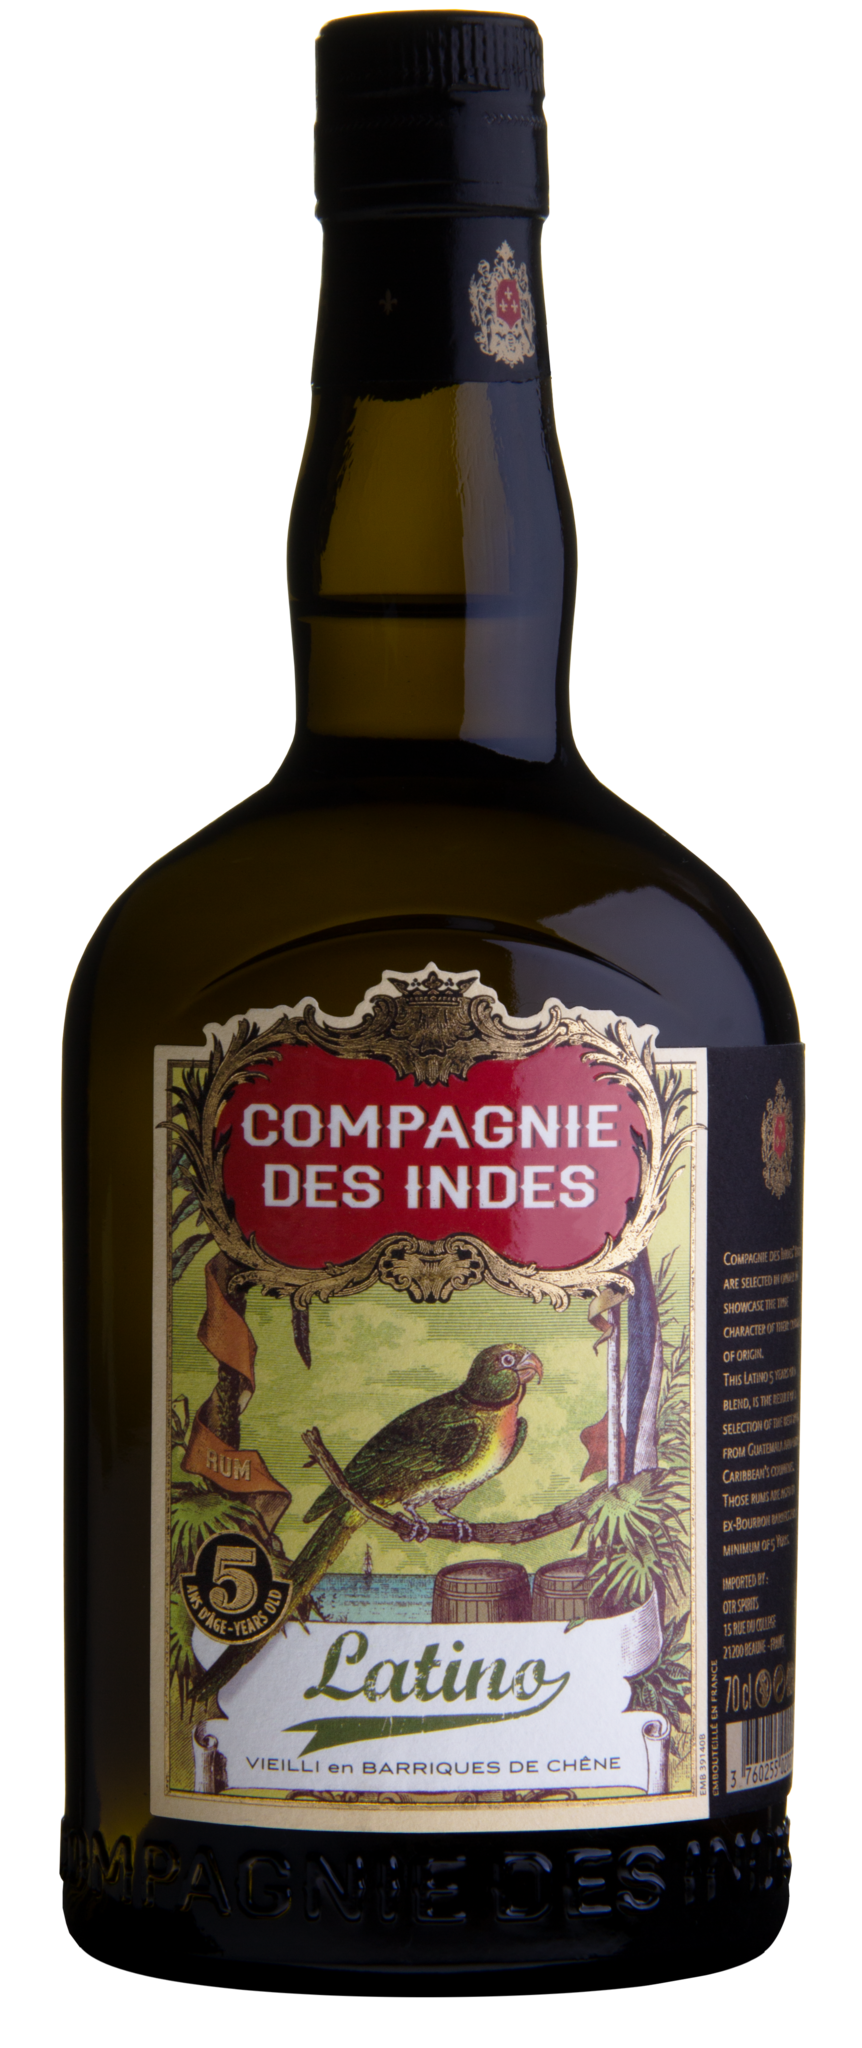 Latino World ltr - 40% Compagnie of 5 Des Indes Spirits Years Old Whiskysite.nl Fine 0,70